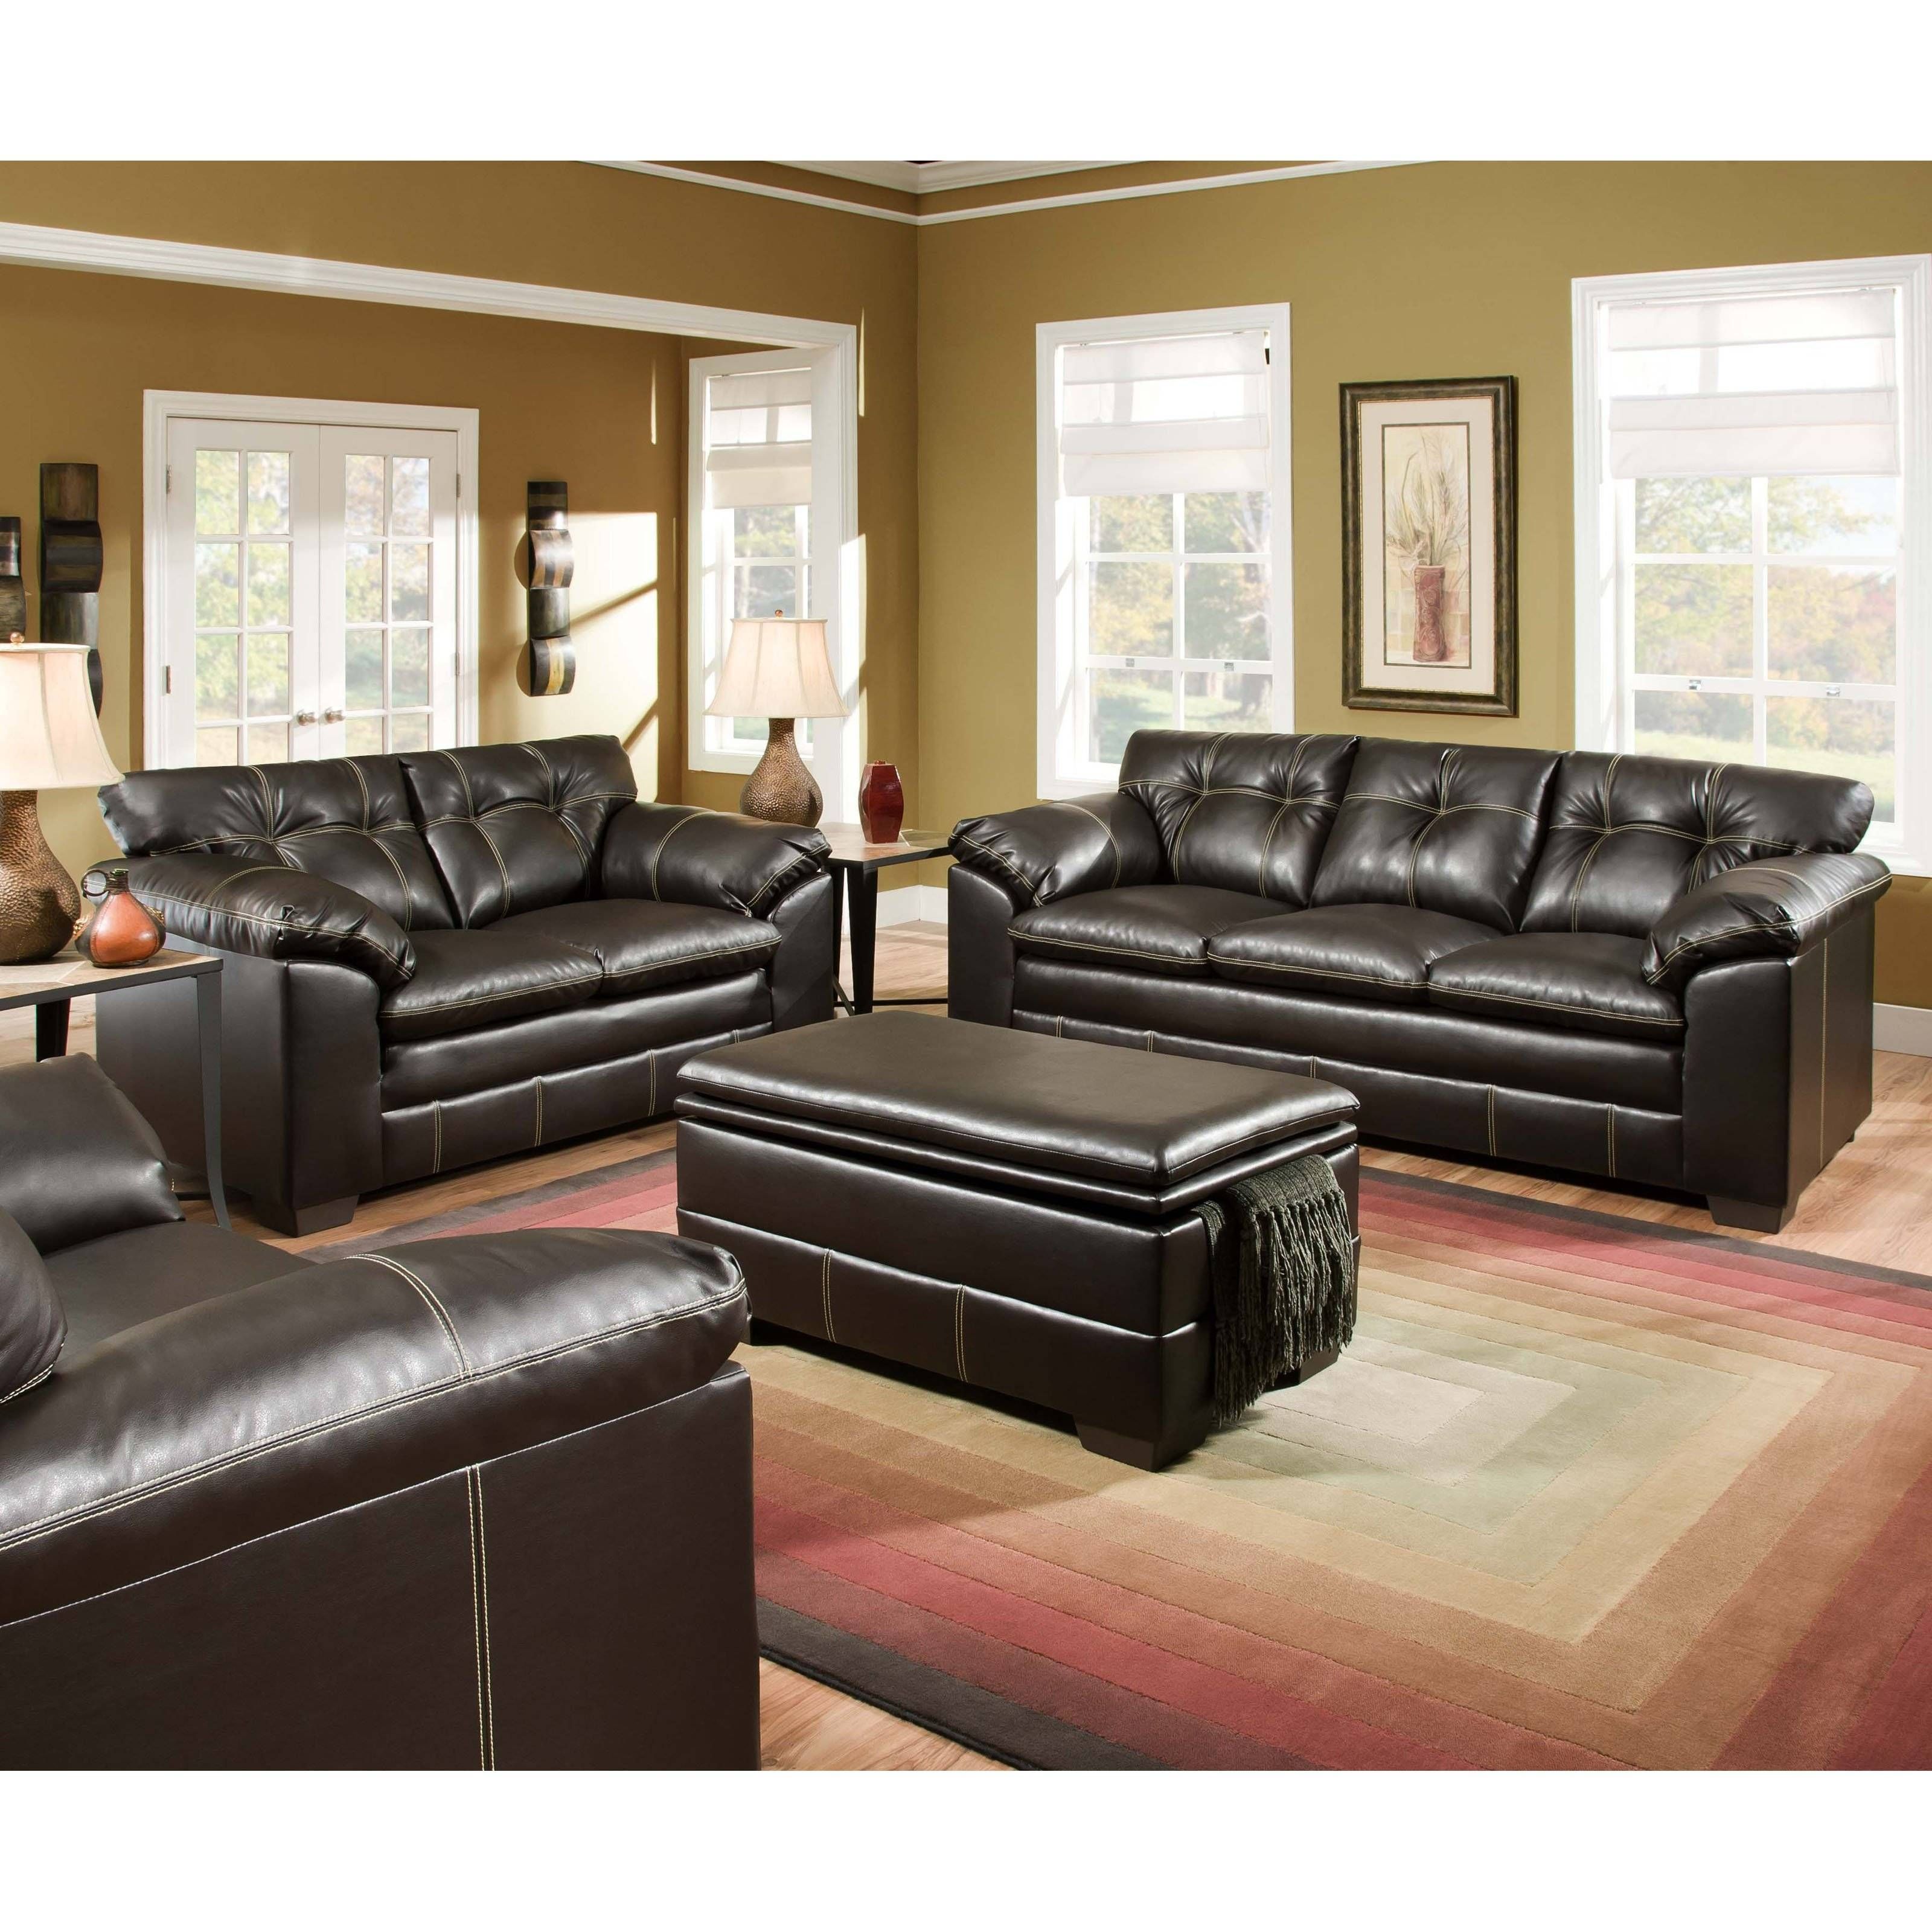 Simmons Upholstery Premier Bonded Leather Sofa | Hayneedle With Simmons Bonded Leather Sofas (View 10 of 15)